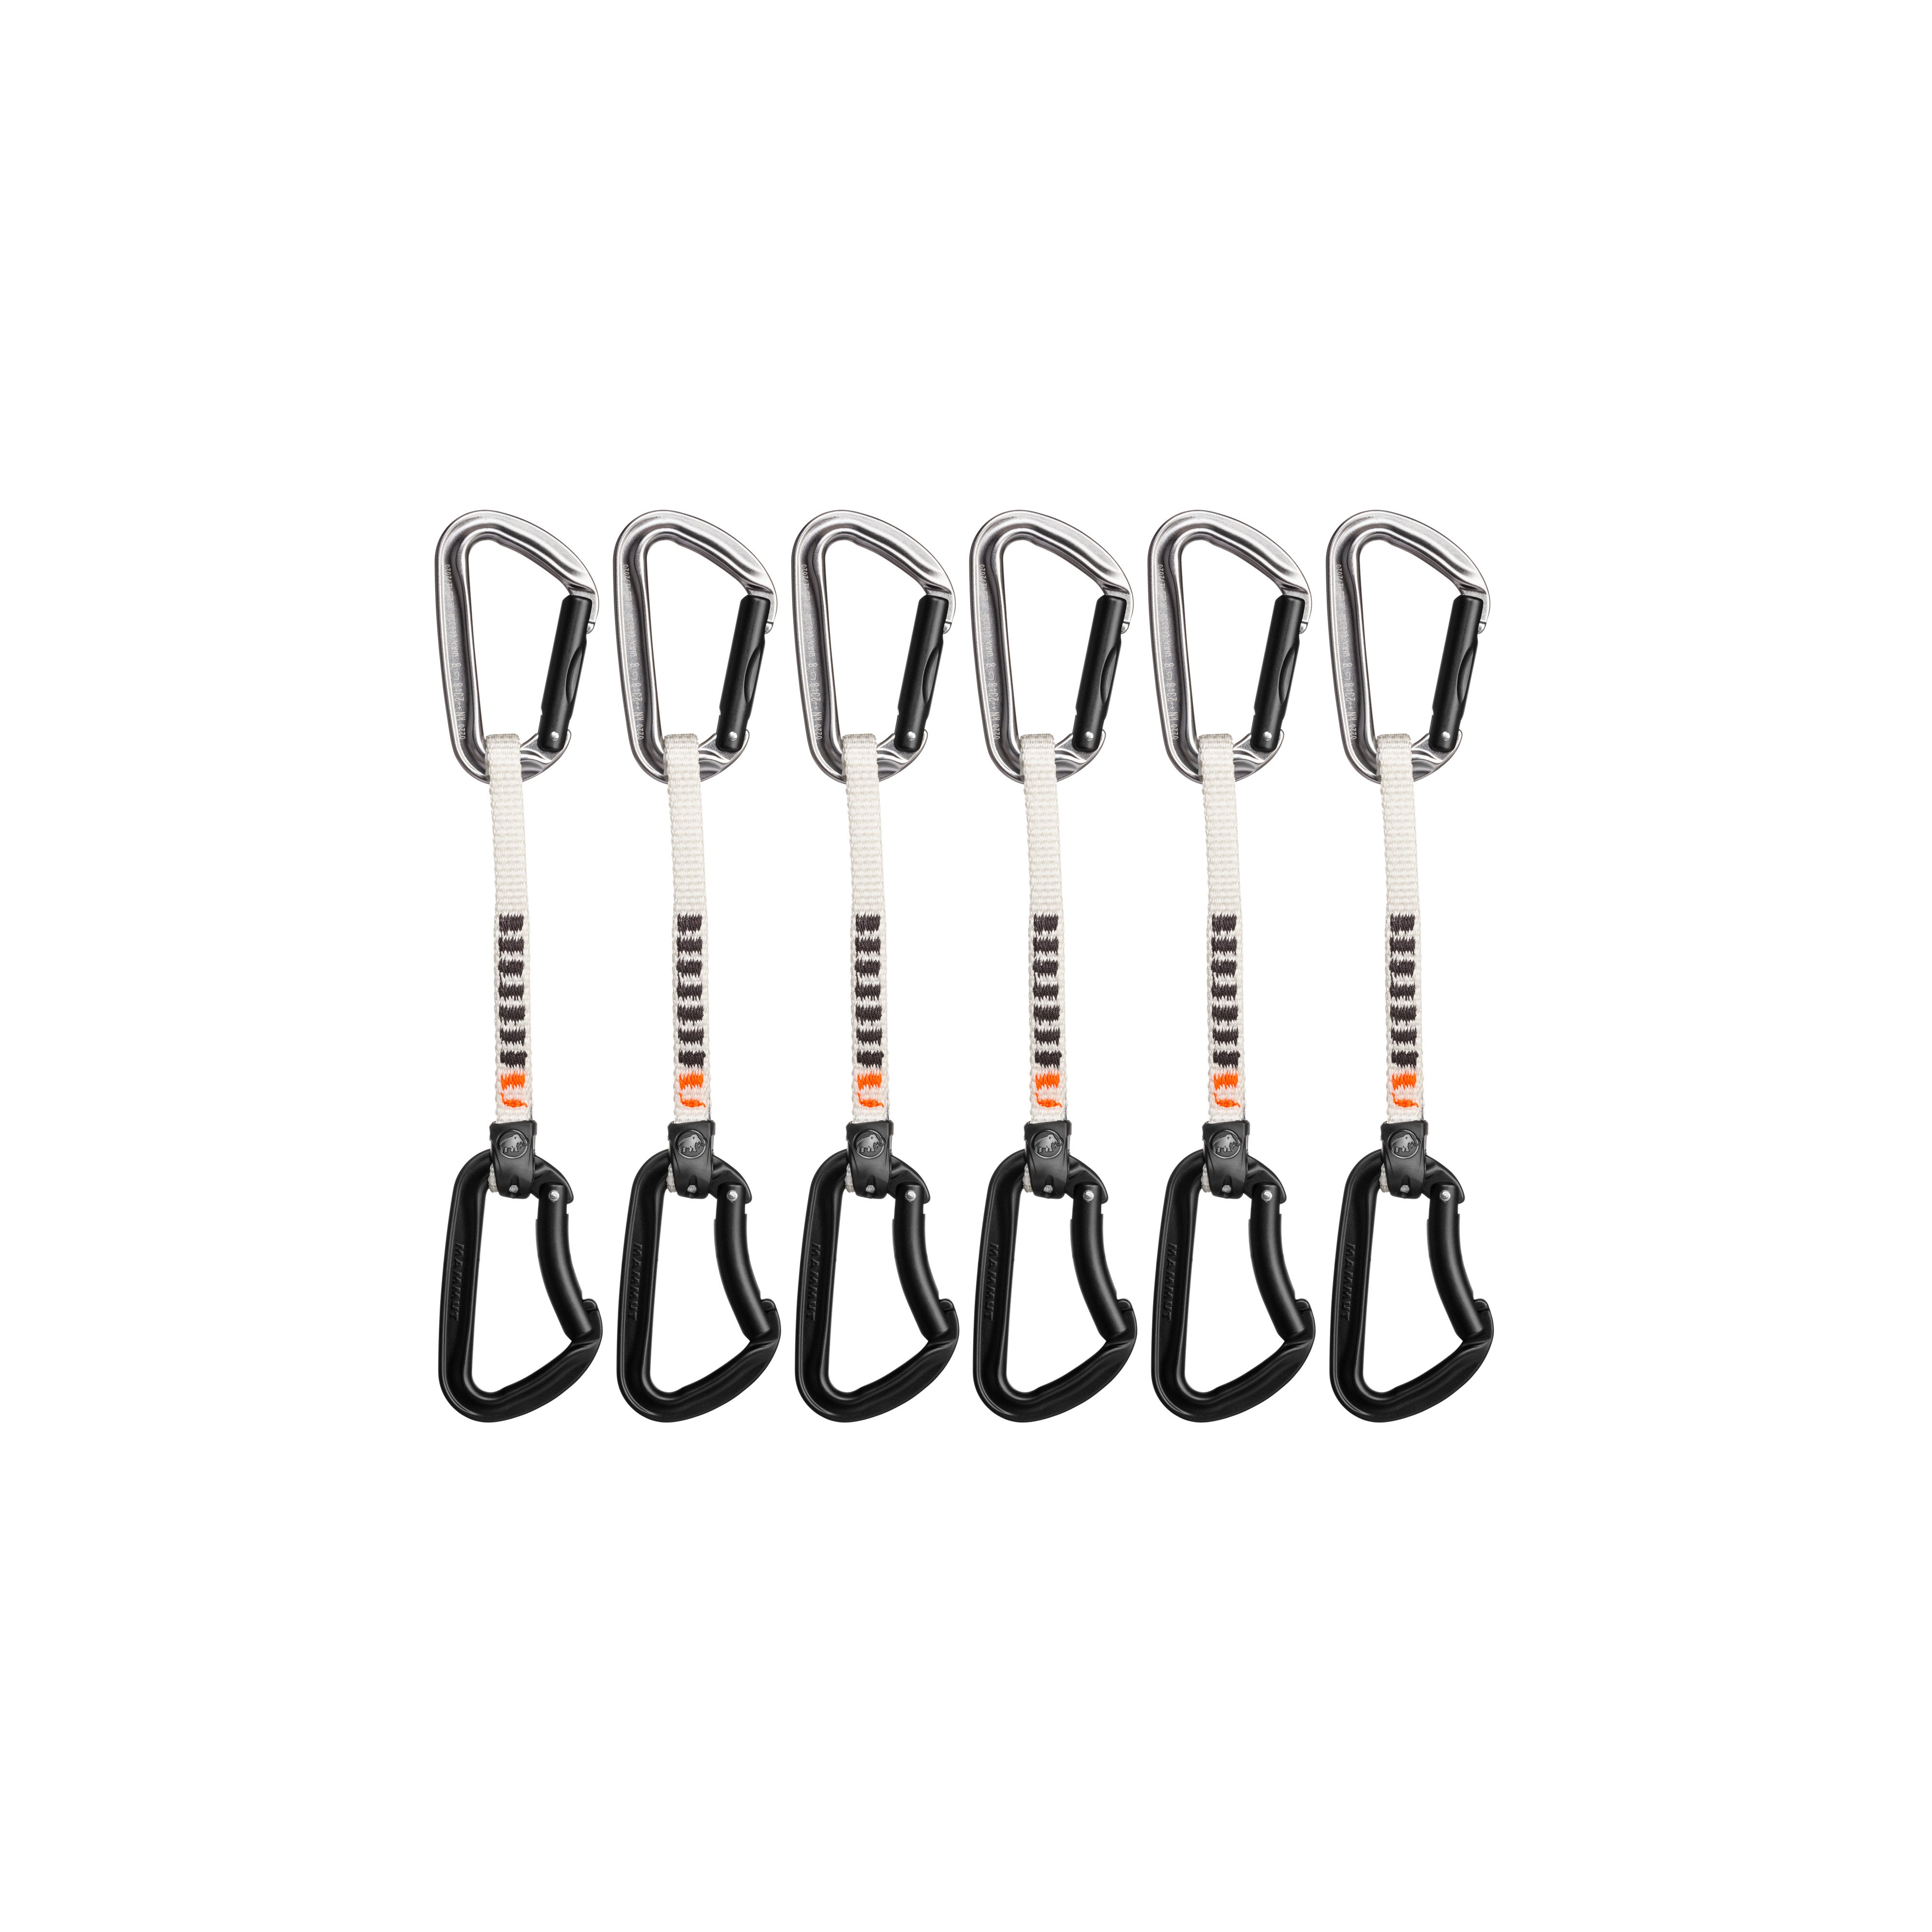 6 Pack Nordwand Key Lock Quickdraws - 15 cm product image